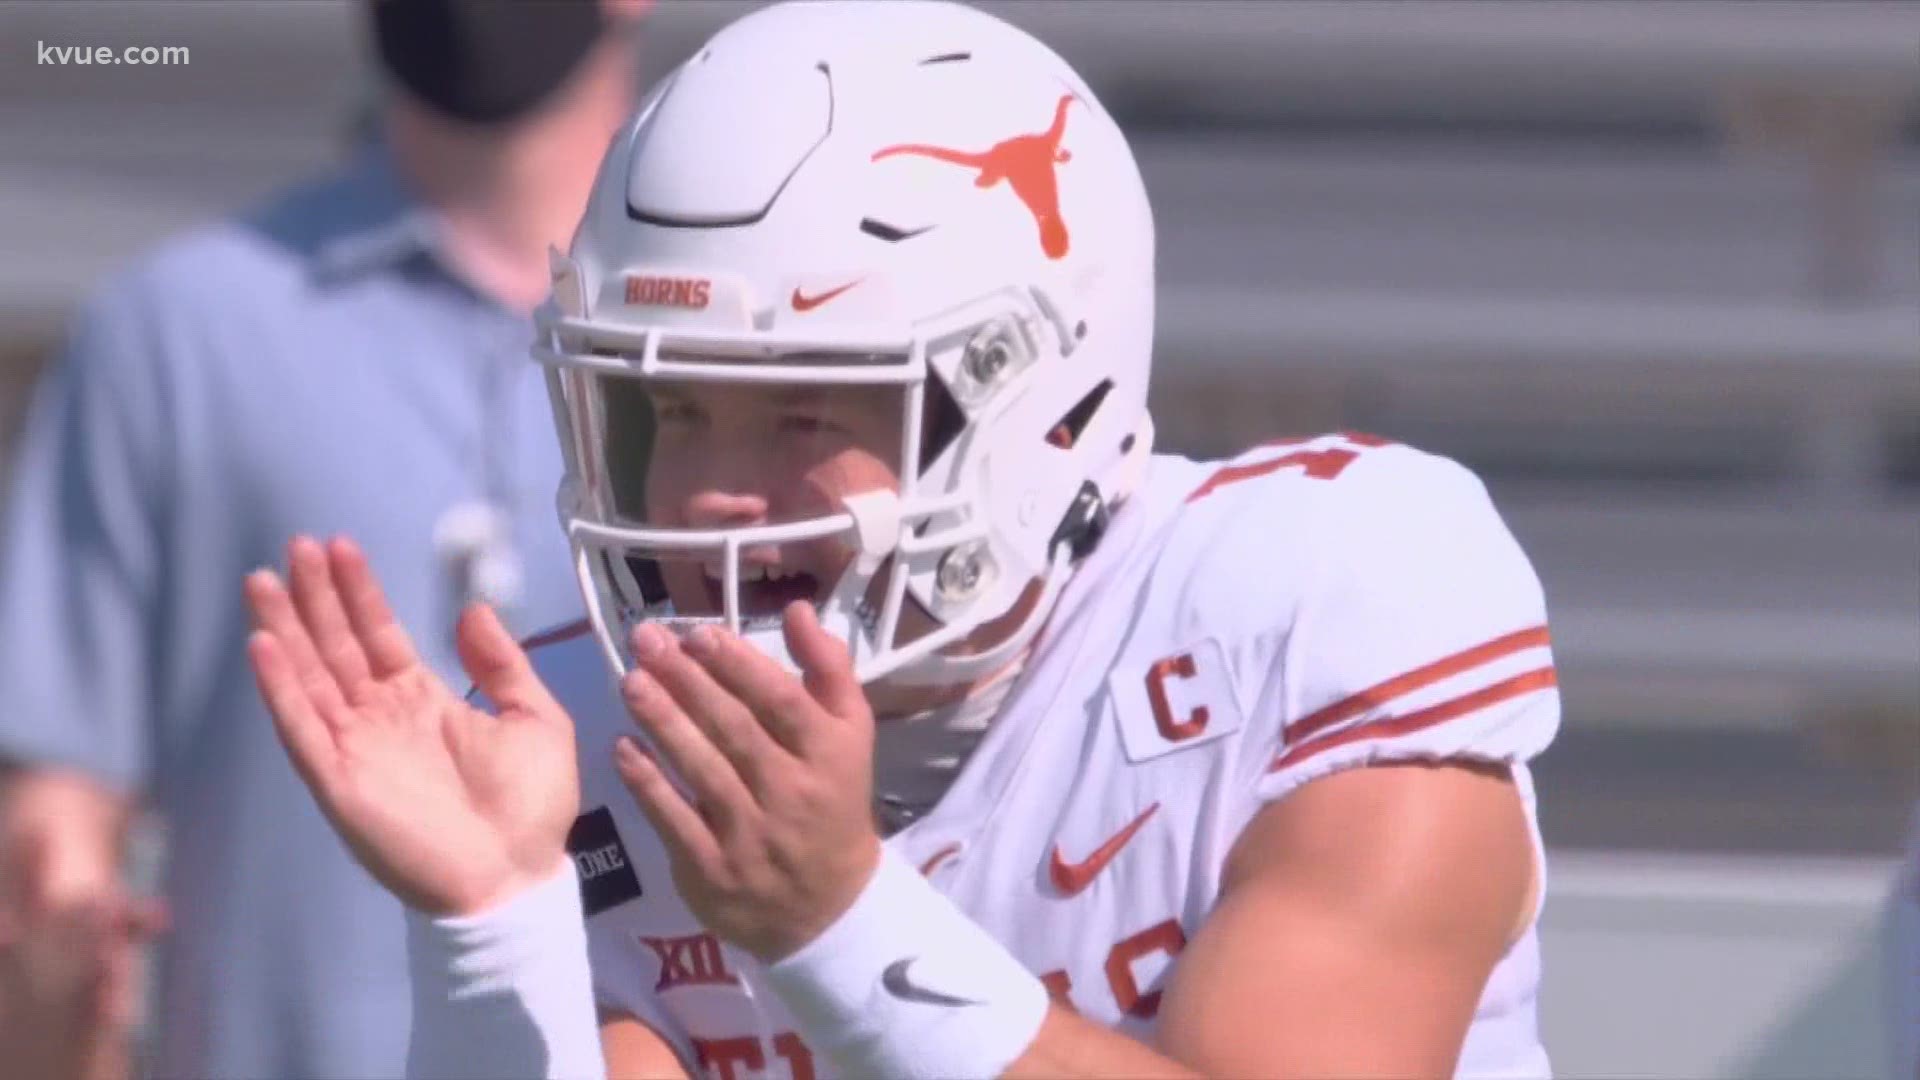 Ehlinger is one of only three players in FBS history to throw for at least 11,000 career yards and rush for more than 1,500 yards.